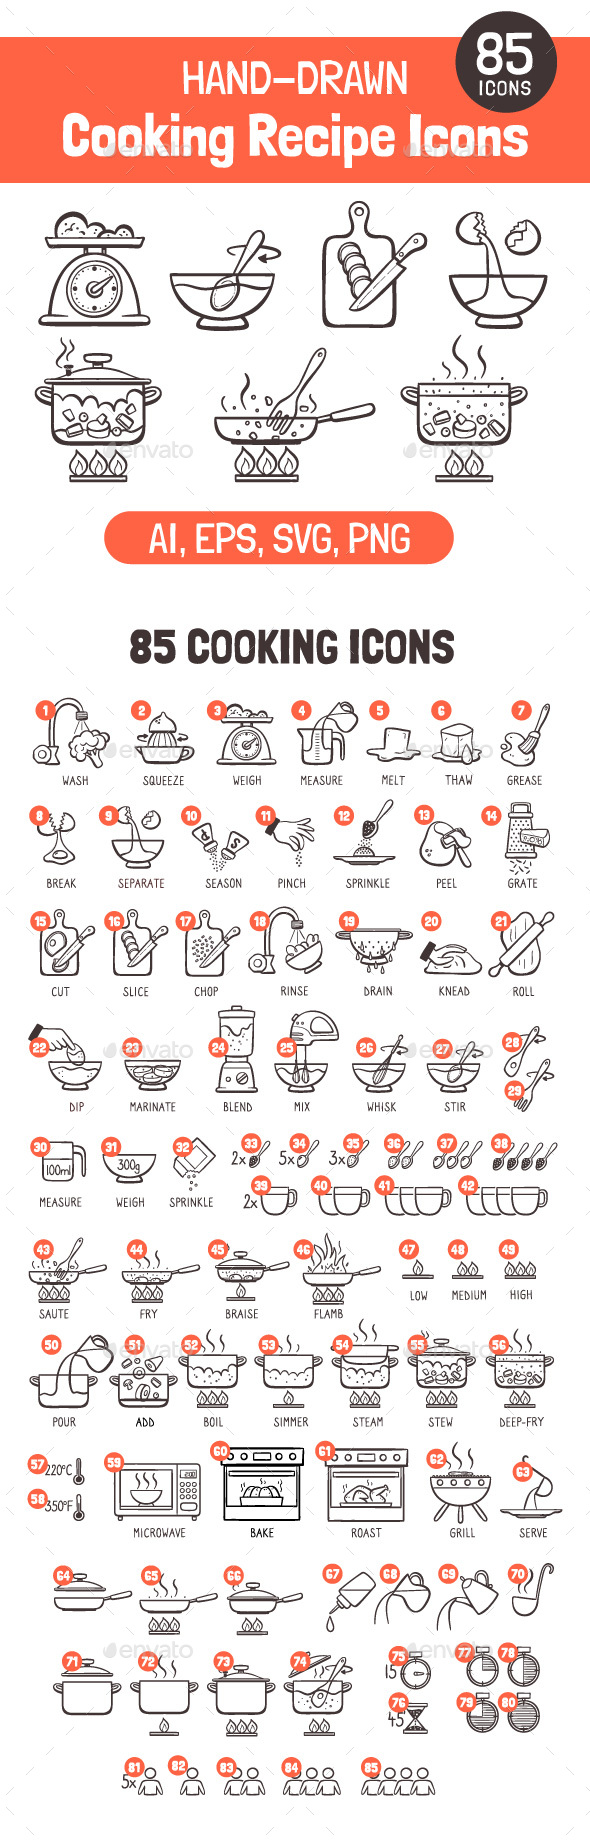 Hand-Drawn Cooking Recipe Icons